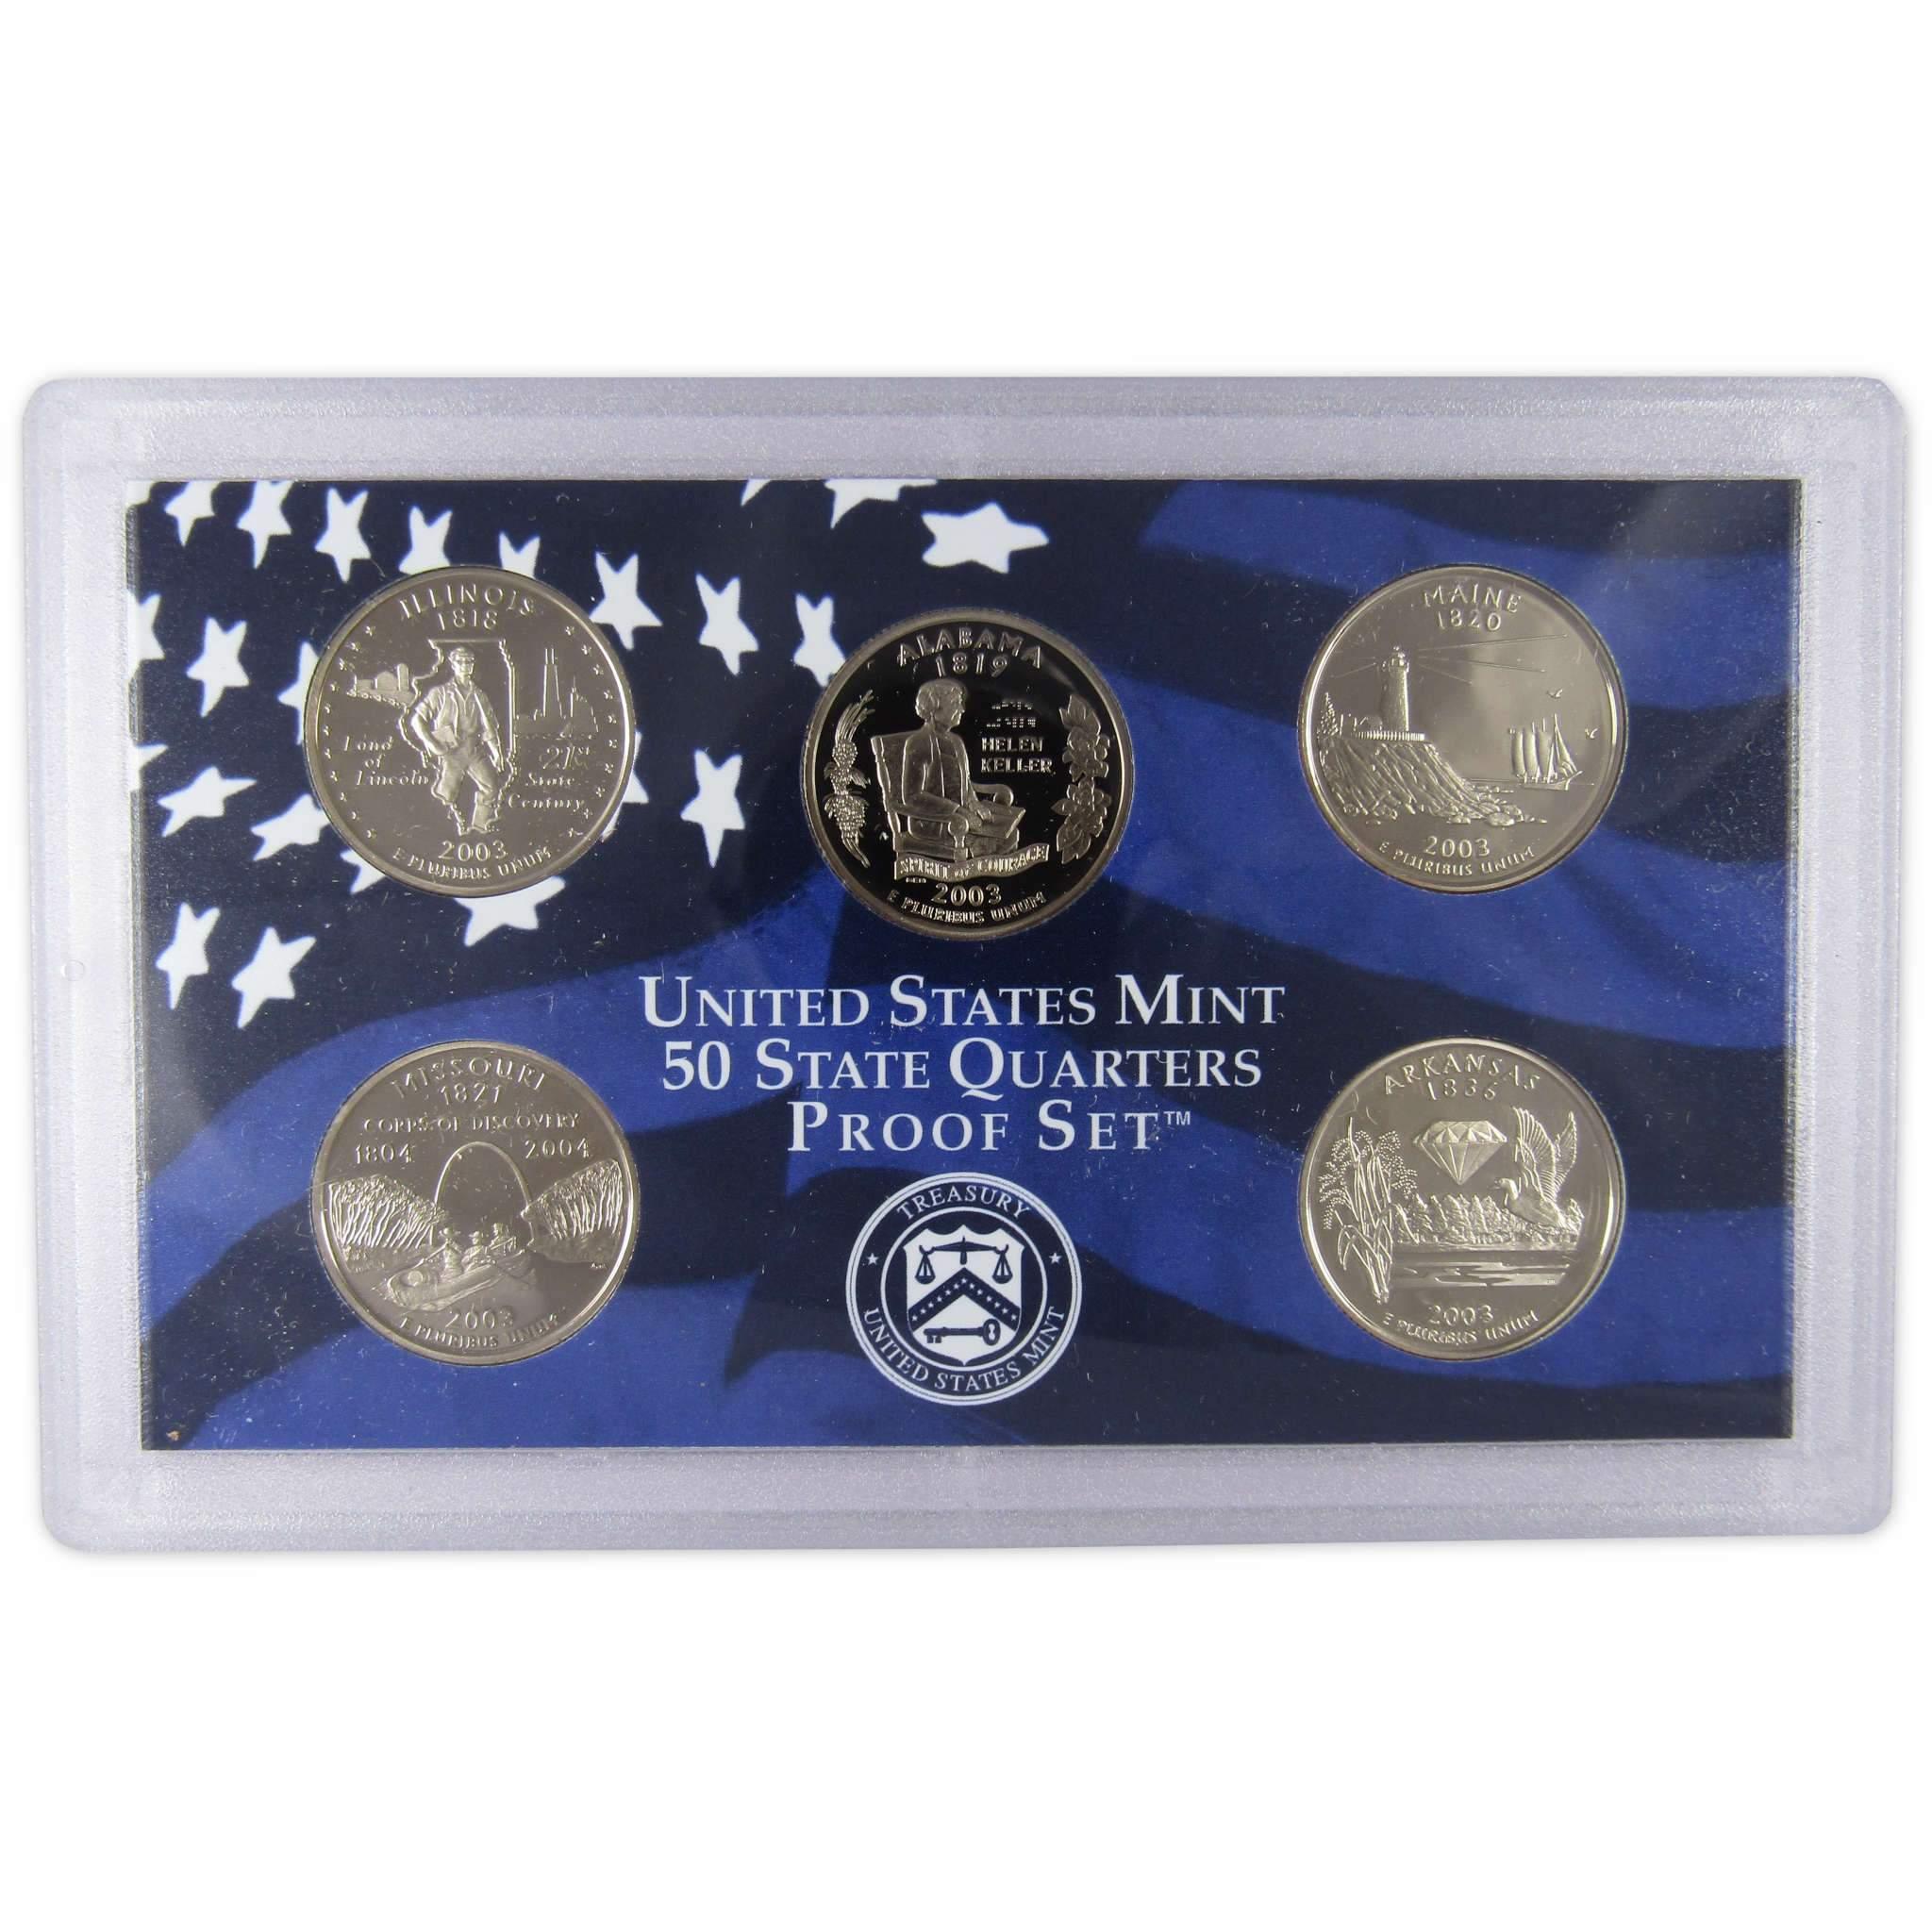 2003 Clad Proof Set U.S. Mint Original Government Packaging OGP Collectible